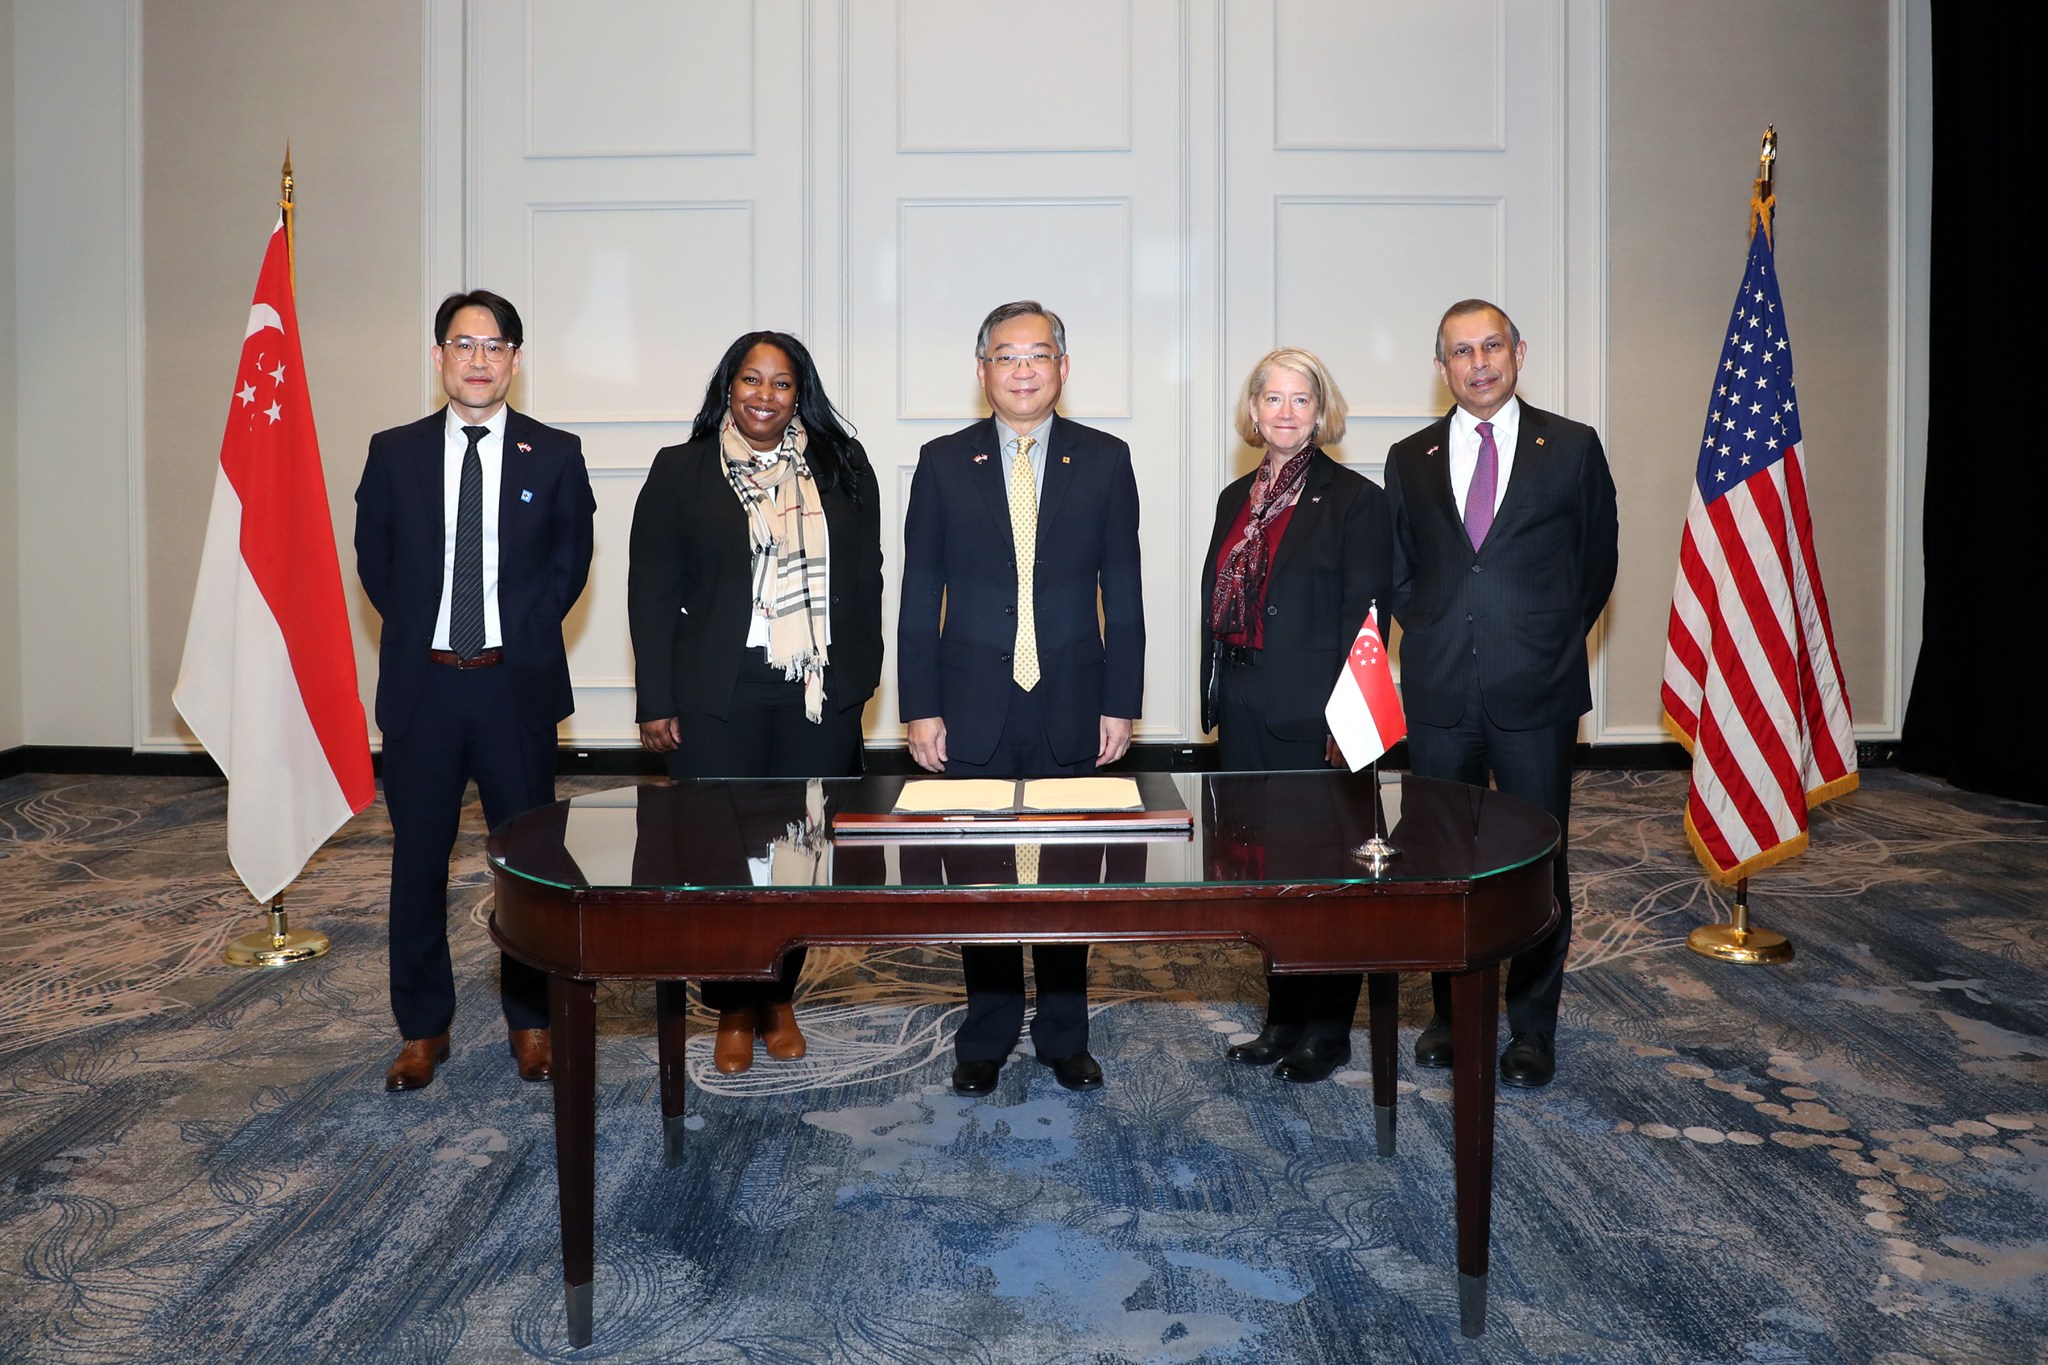 Officials from NASA, the U.S. State Department, and the Singapore Ministry of Communications and Information pose for a photo following Singapore's signing of the Artemis Accords in Washington, March 28, 2022.